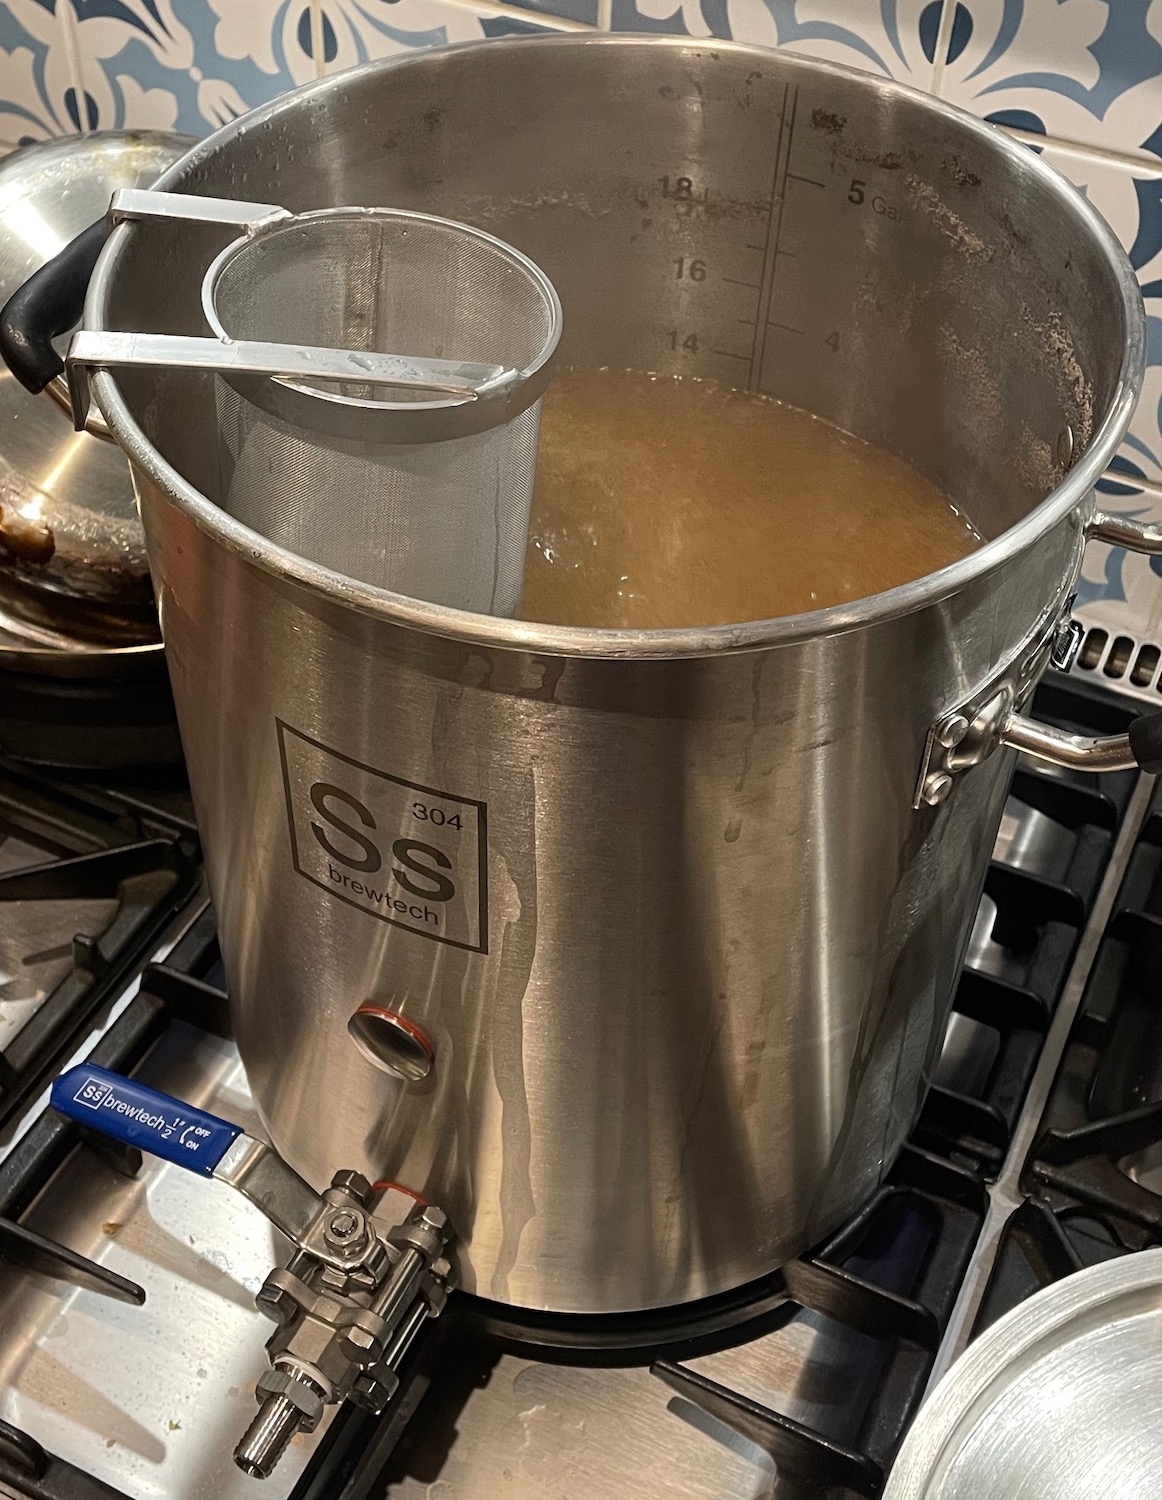 Boiling the wort